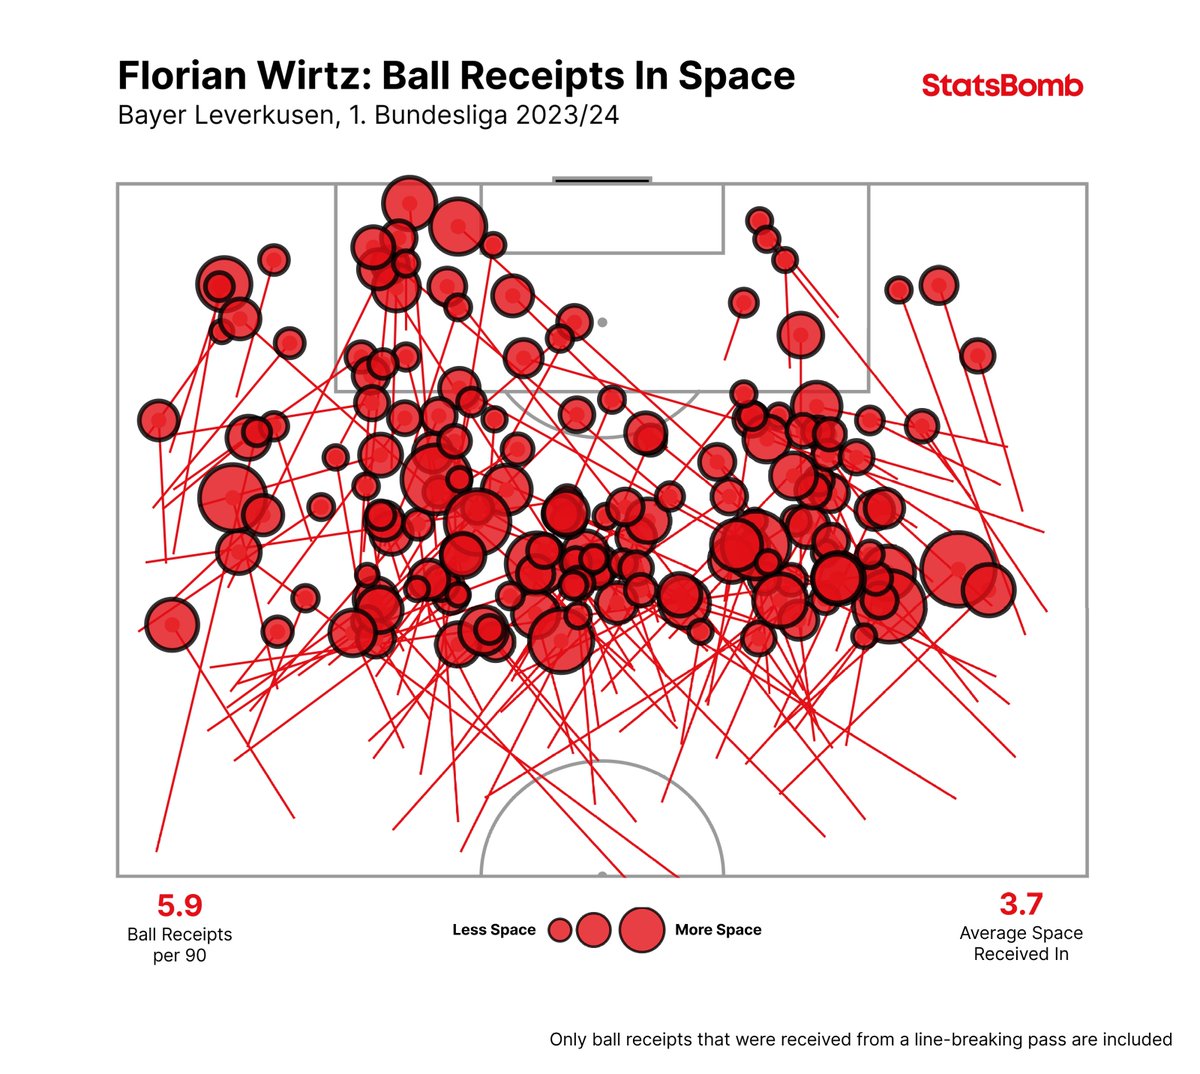 Florian Wirtz has received more line-breaking passes in at least 2m of space in the final third than any other player in the Big 5 Leagues in 2023/24 The Leverkusen midfielder has received 5.9 of these passes per 90 minutes - only one other player has received more than 5 per 90